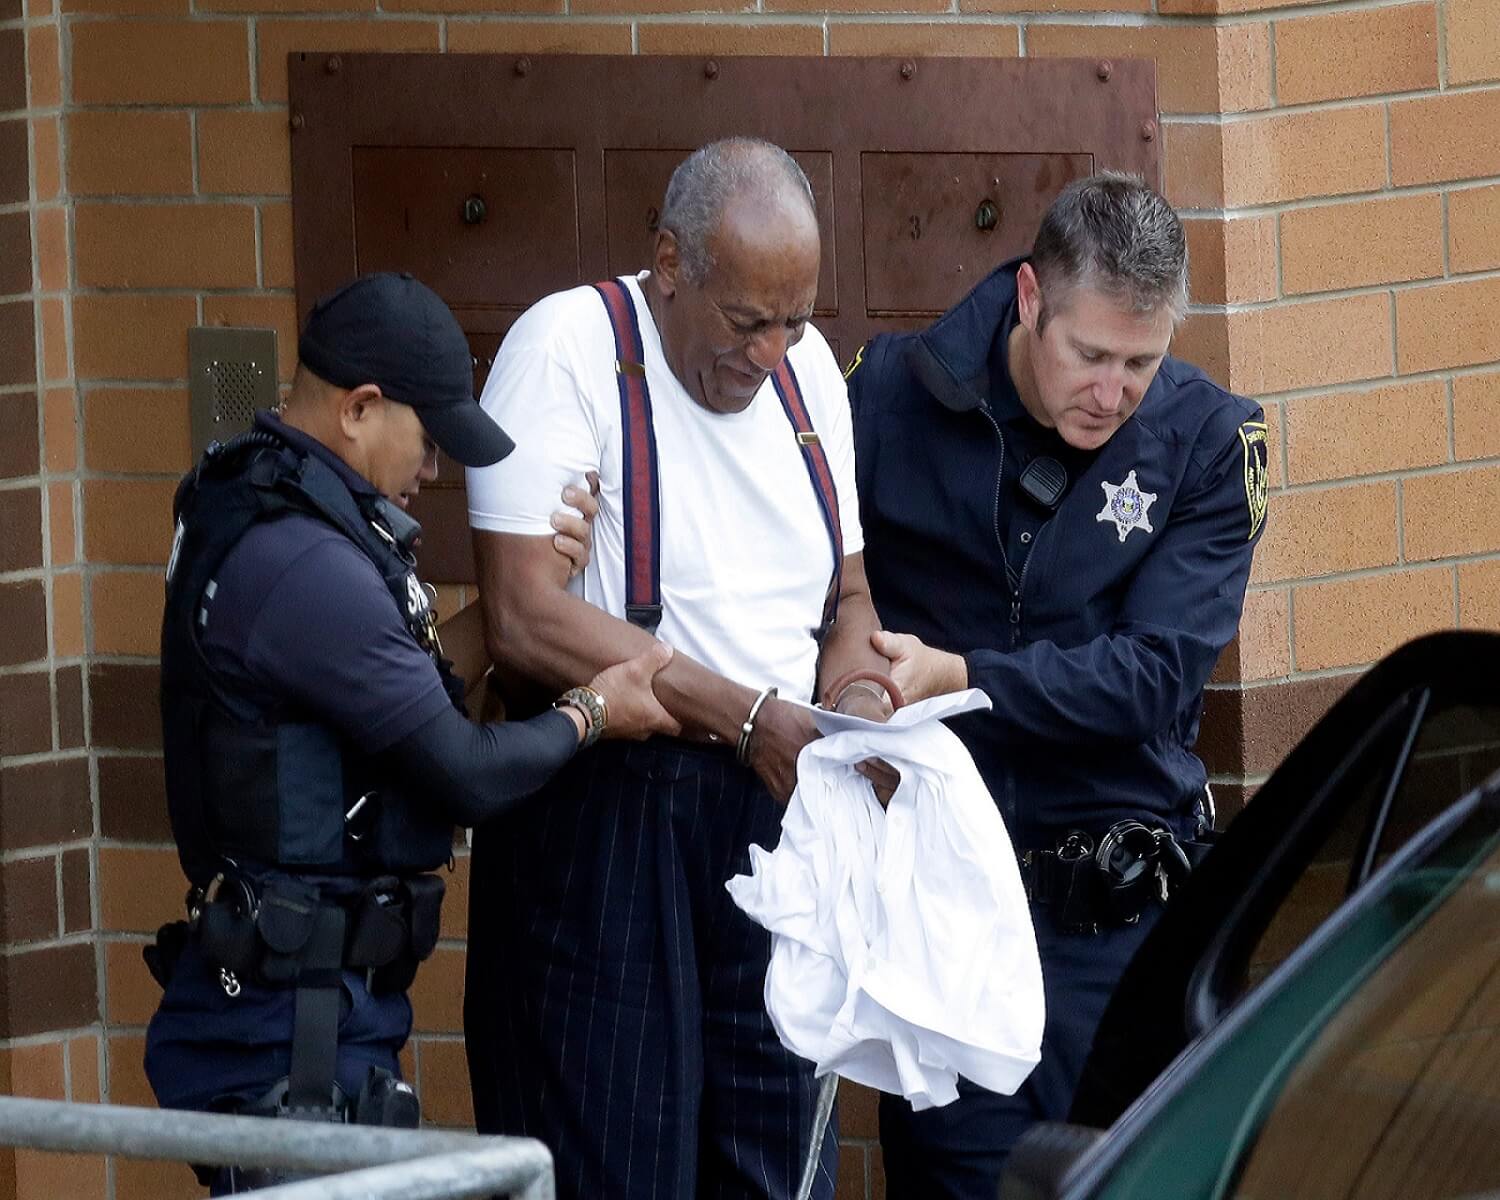 Bill Cosby released from prison timeline of arrest, trial, and conviction